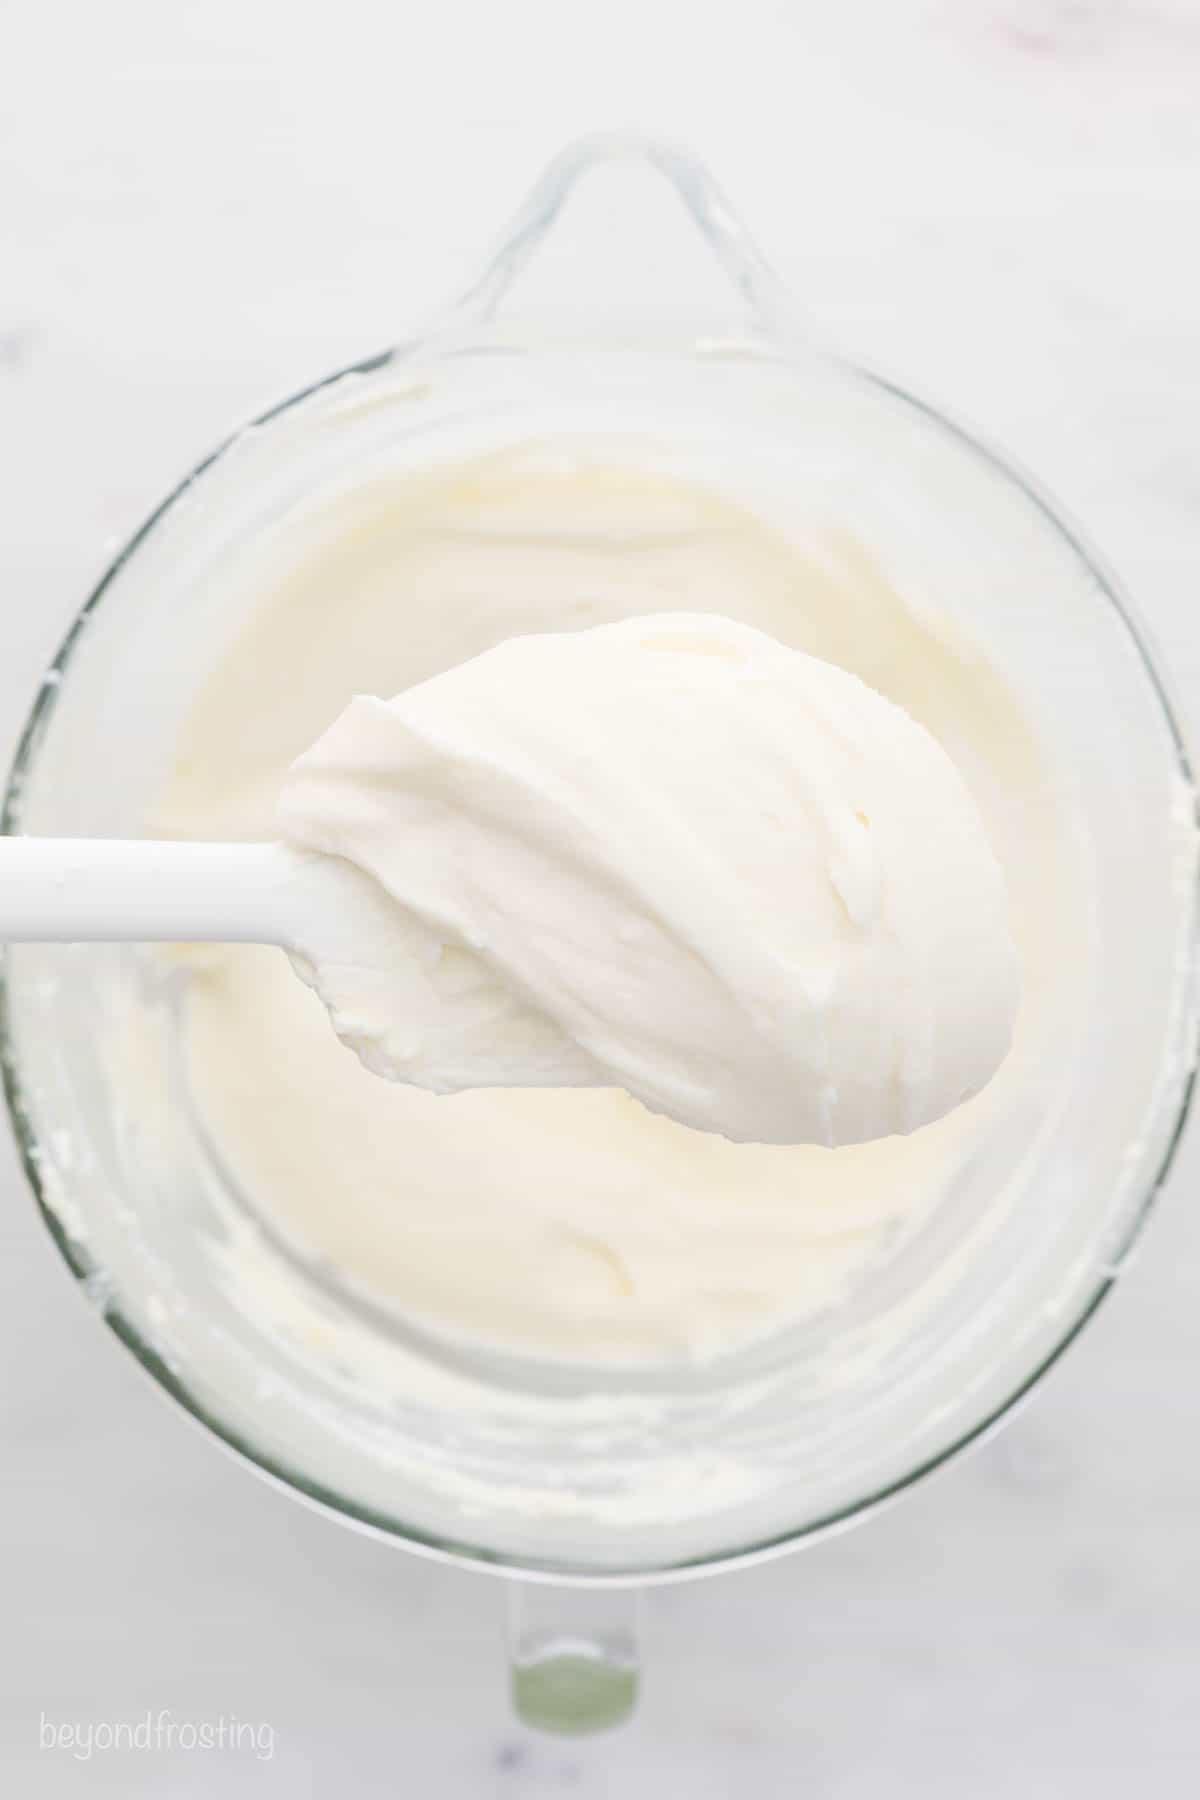 Fluffy cream cheese frosting on a rubber spatula hovering over a glass beaker containing more frosting